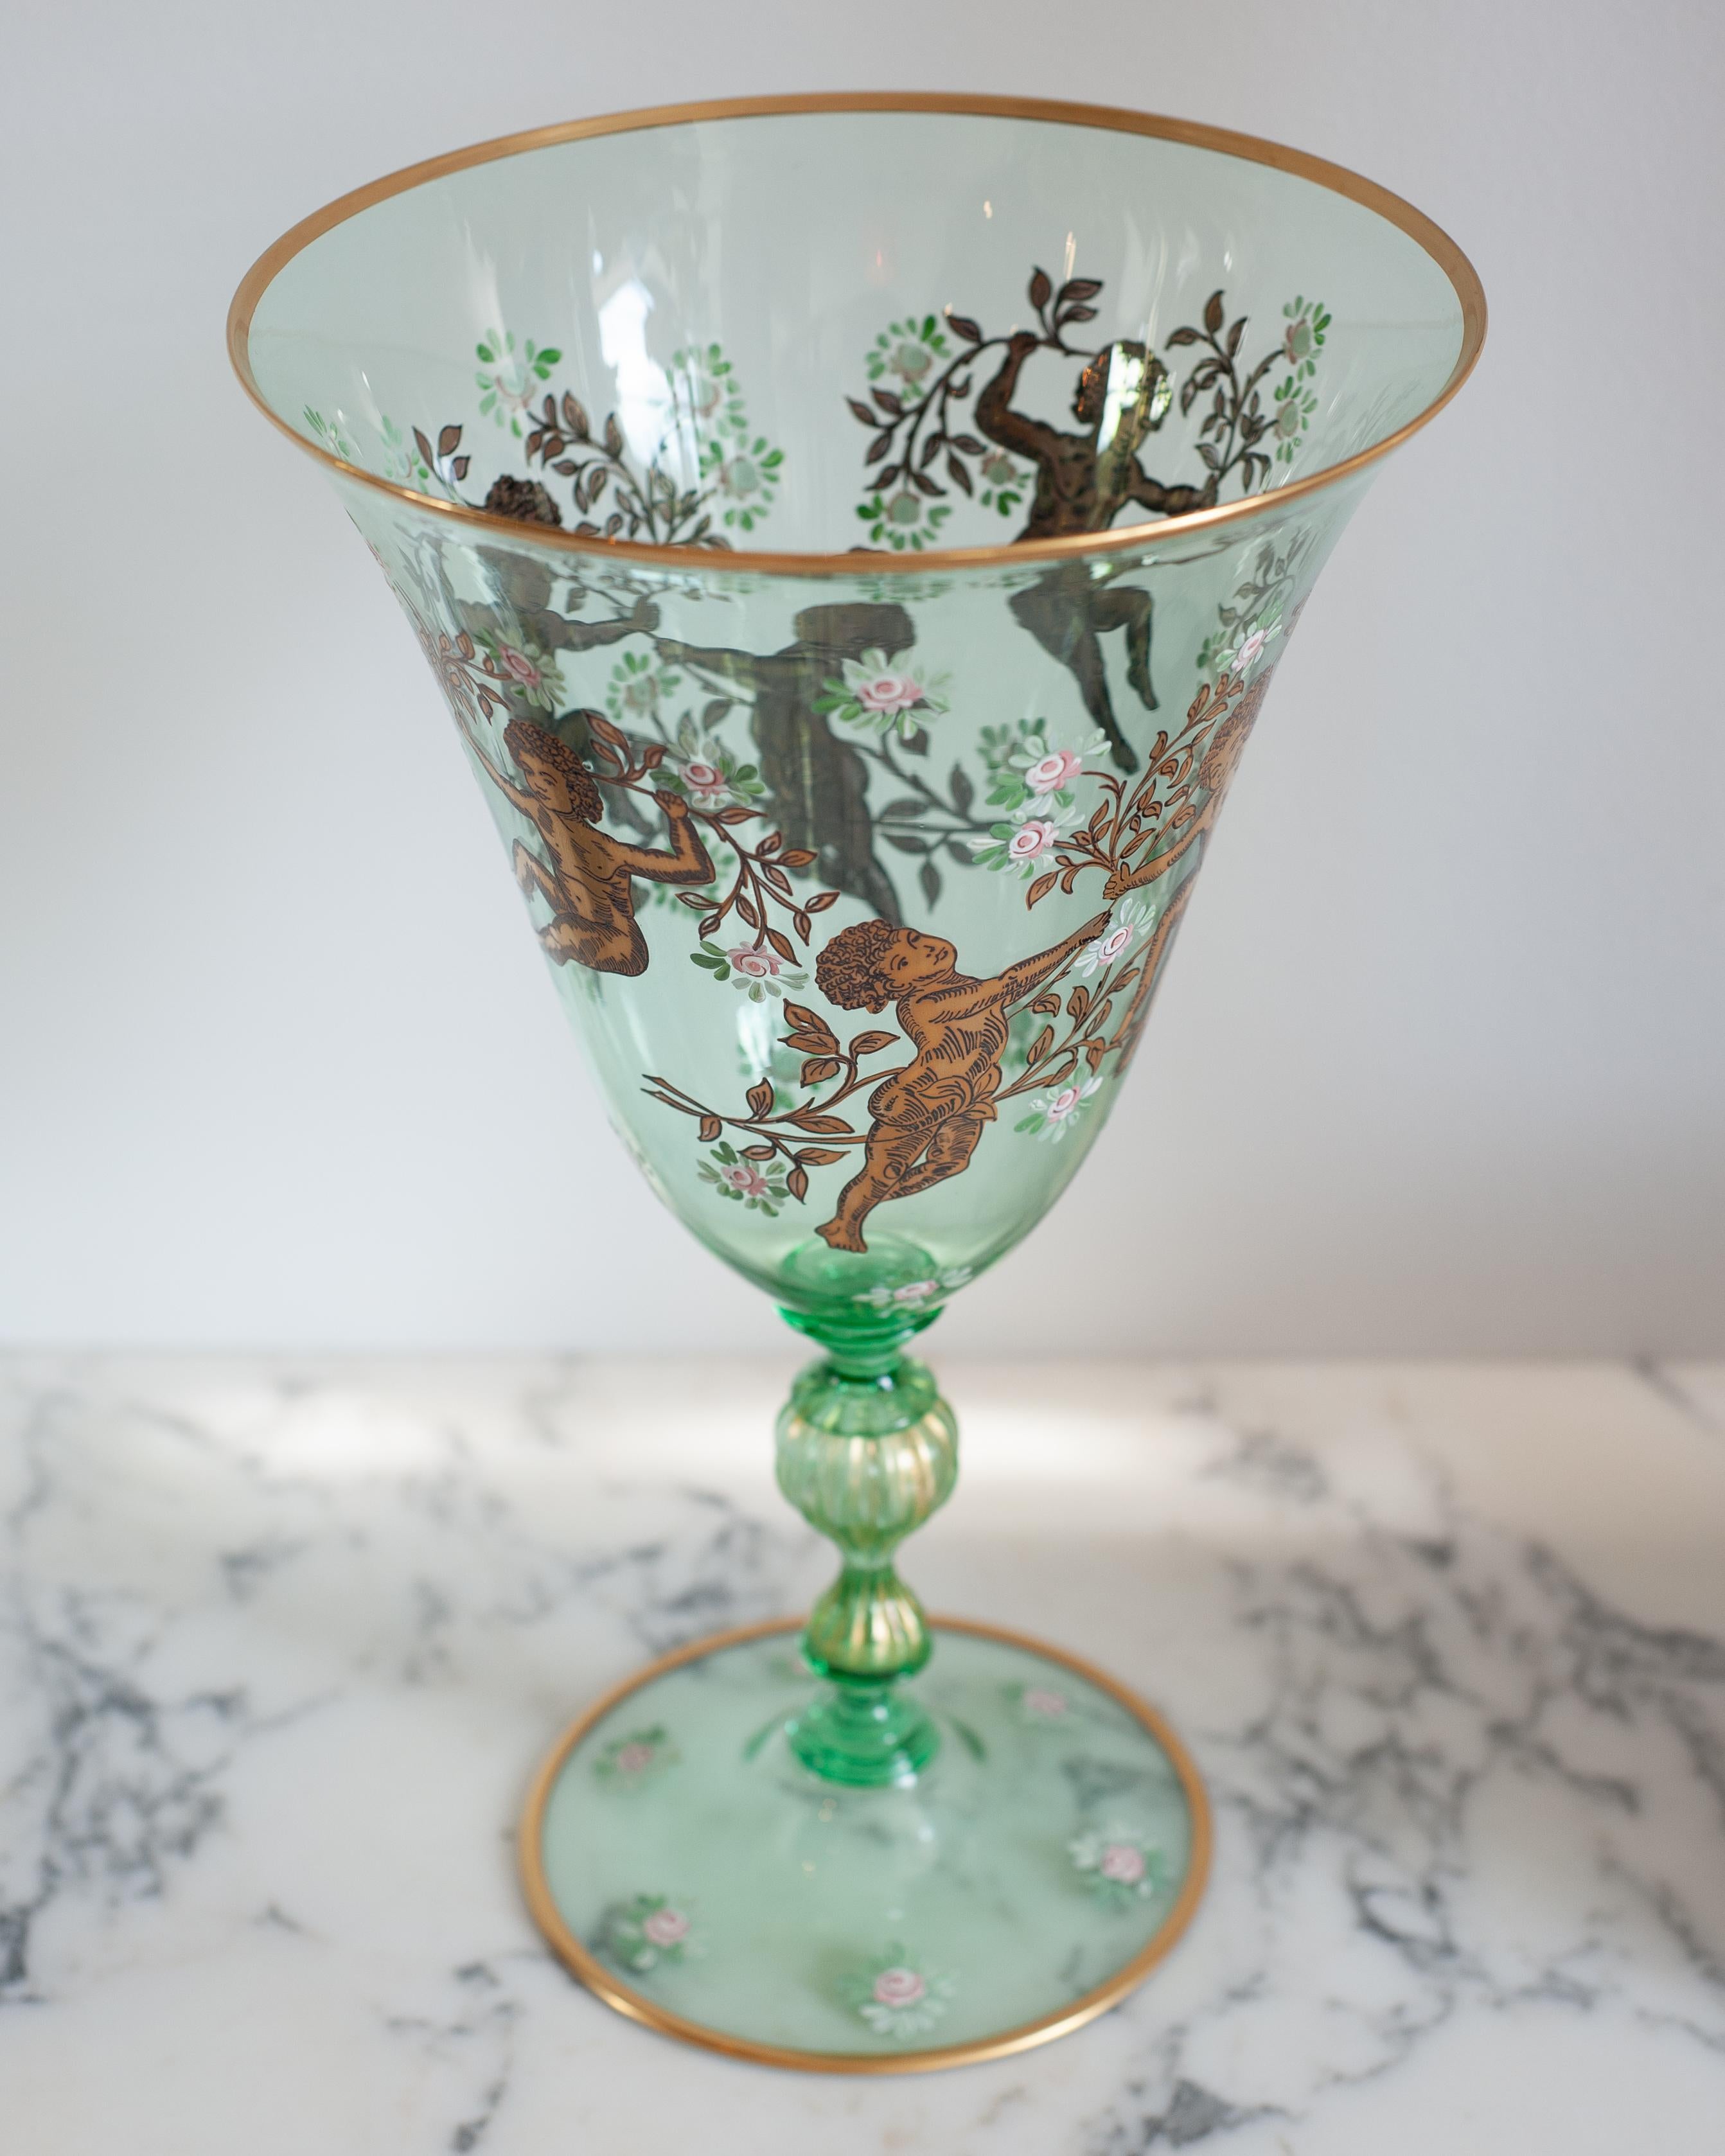 Bring a touch of Venetian elegance into your home with this whimsical spring green Murano vase finished with intricate gold leaf ornamentation. Decorated with cherubs and floral designs, this vase is a modern take on classical design, newly